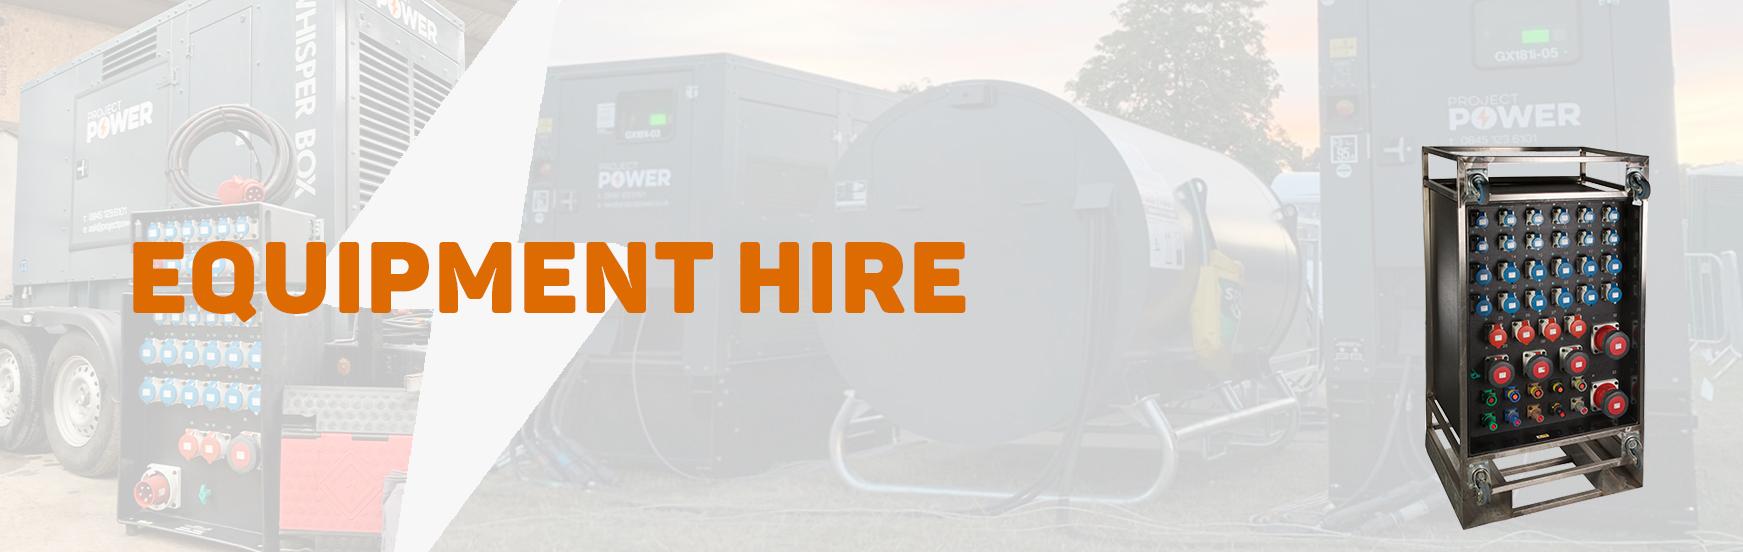 project power equipment hire